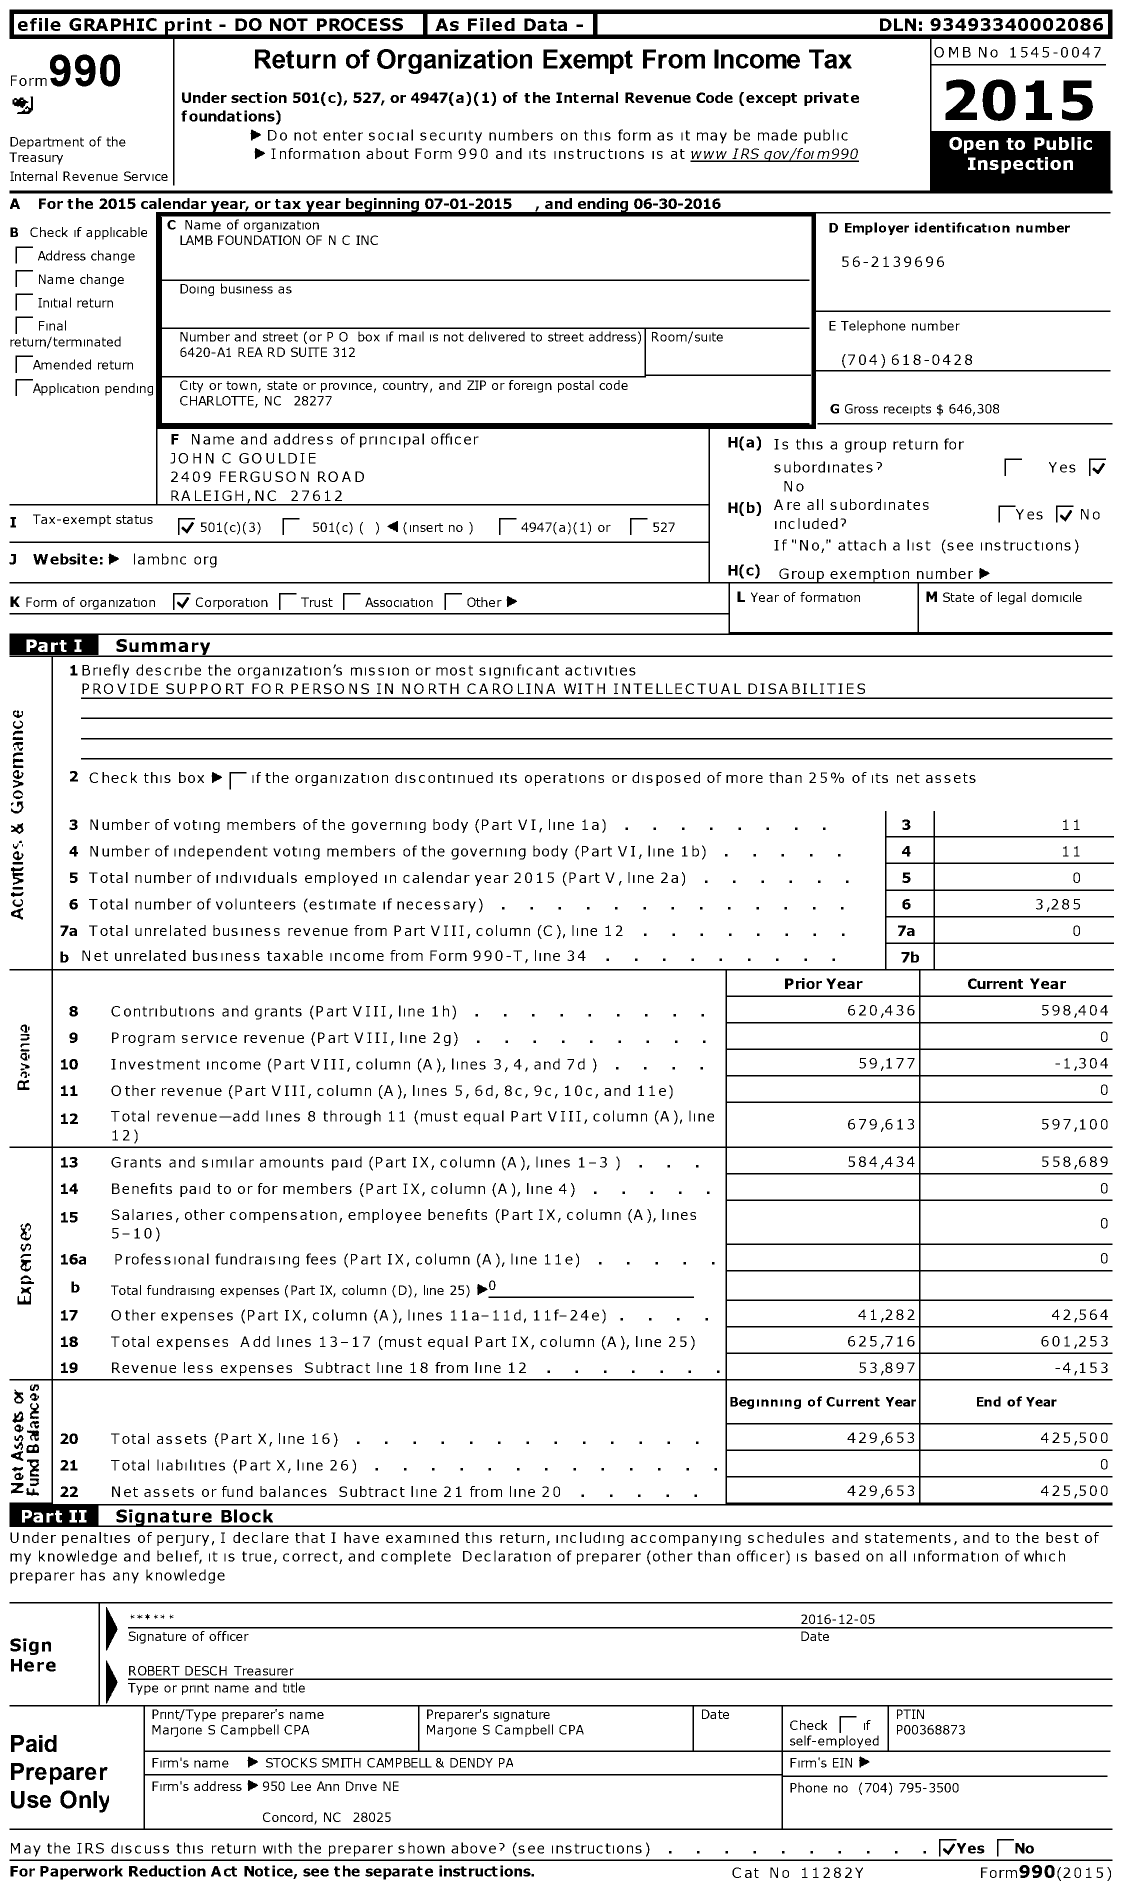 Image of first page of 2015 Form 990 for Lamb Foundation of N C